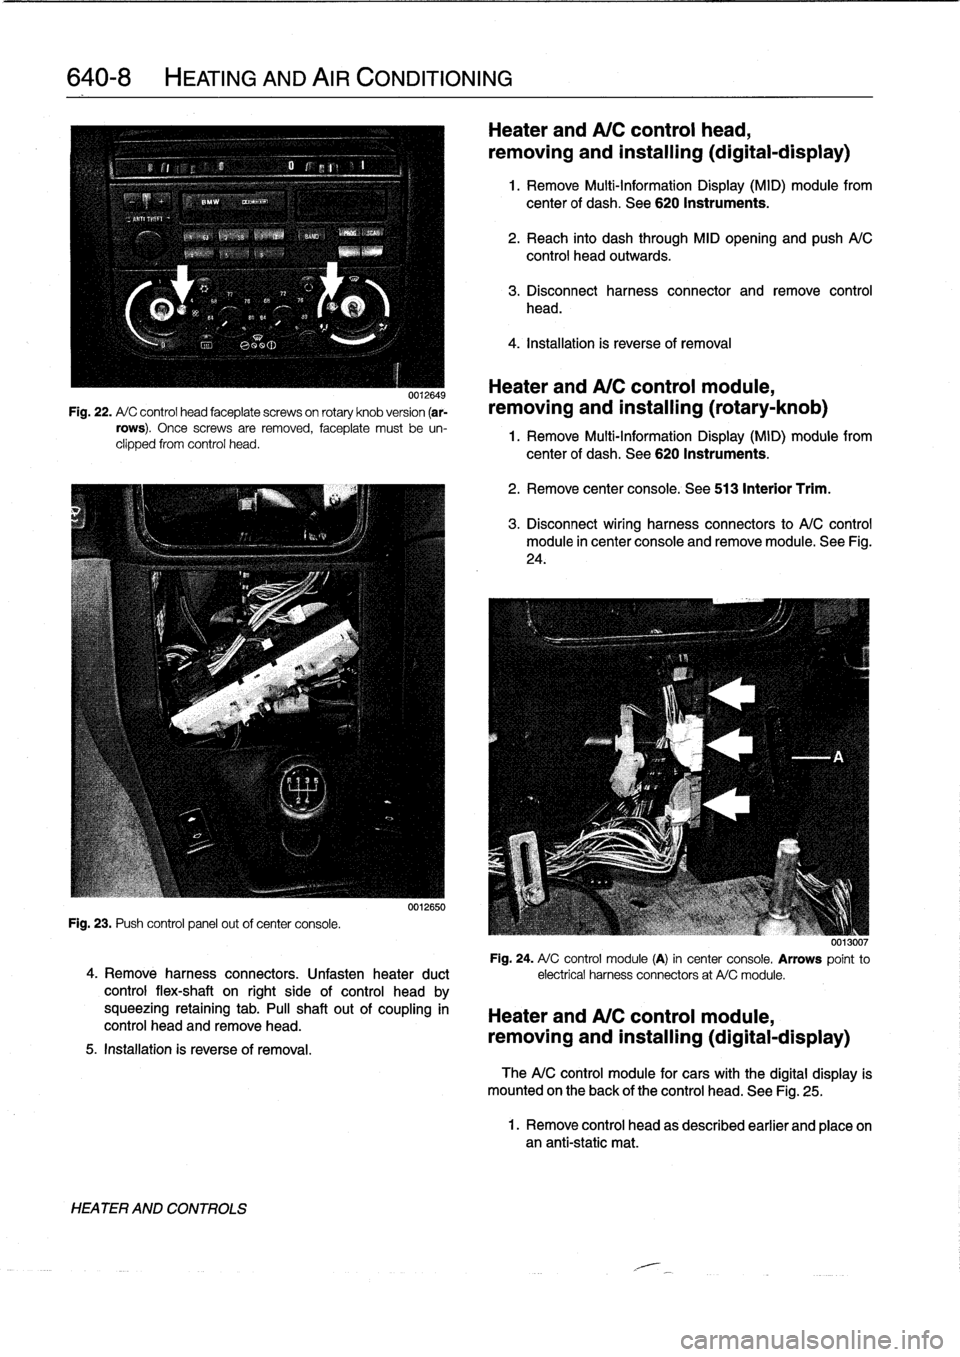 BMW 325i 1996 E36 Workshop Manual 
640-8

	

HEATING
AND
AIR
CONDITIONING

0012649

Fig
.
22
.
A/
C
control
head
faceplate
screwson
rotary
knob
version
(ar-
rows)
.
Once
screws
are
removed,
faceplate
must
be
un-
clipped
from
control
h